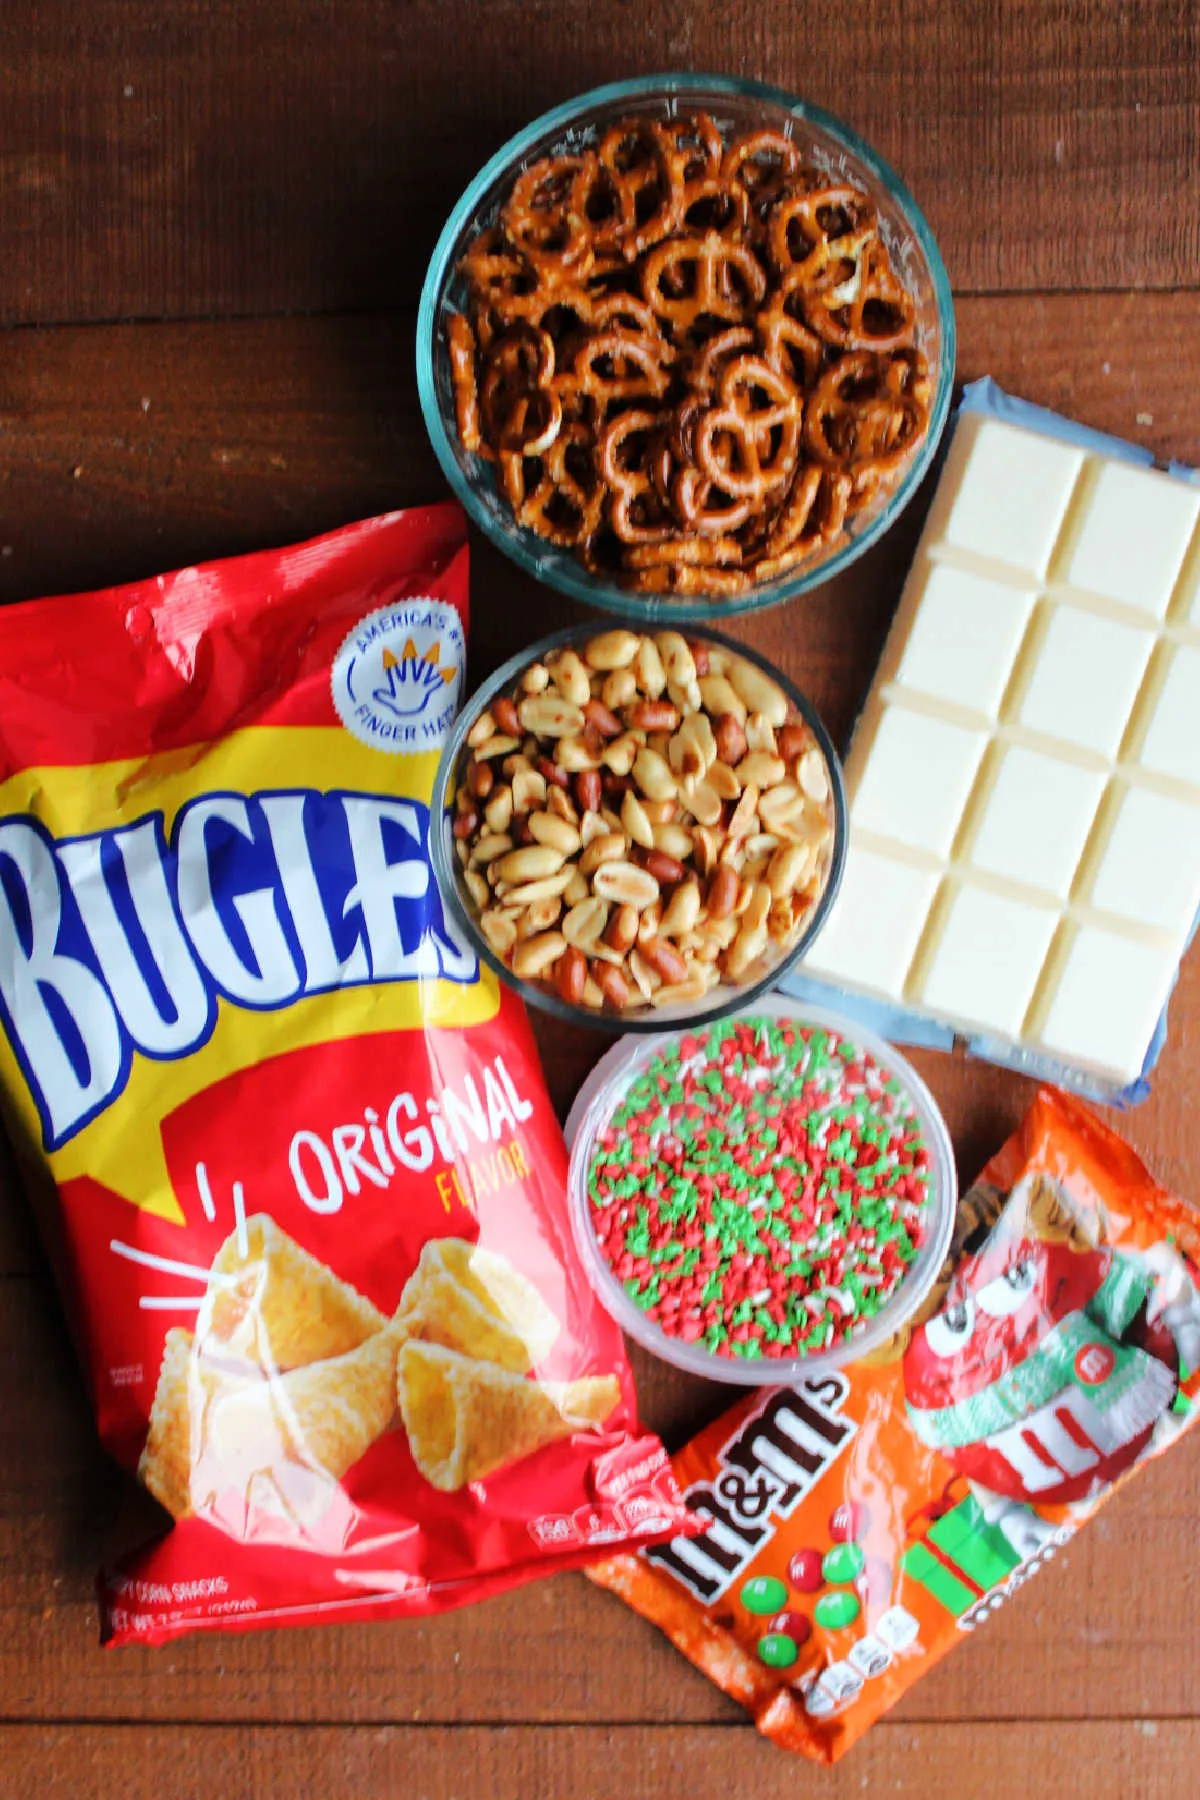 Ingredients: bugles, pretzels, peanuts, sprinkles, almond bark, sprinkles and m&ms ready to be made into snack mix.